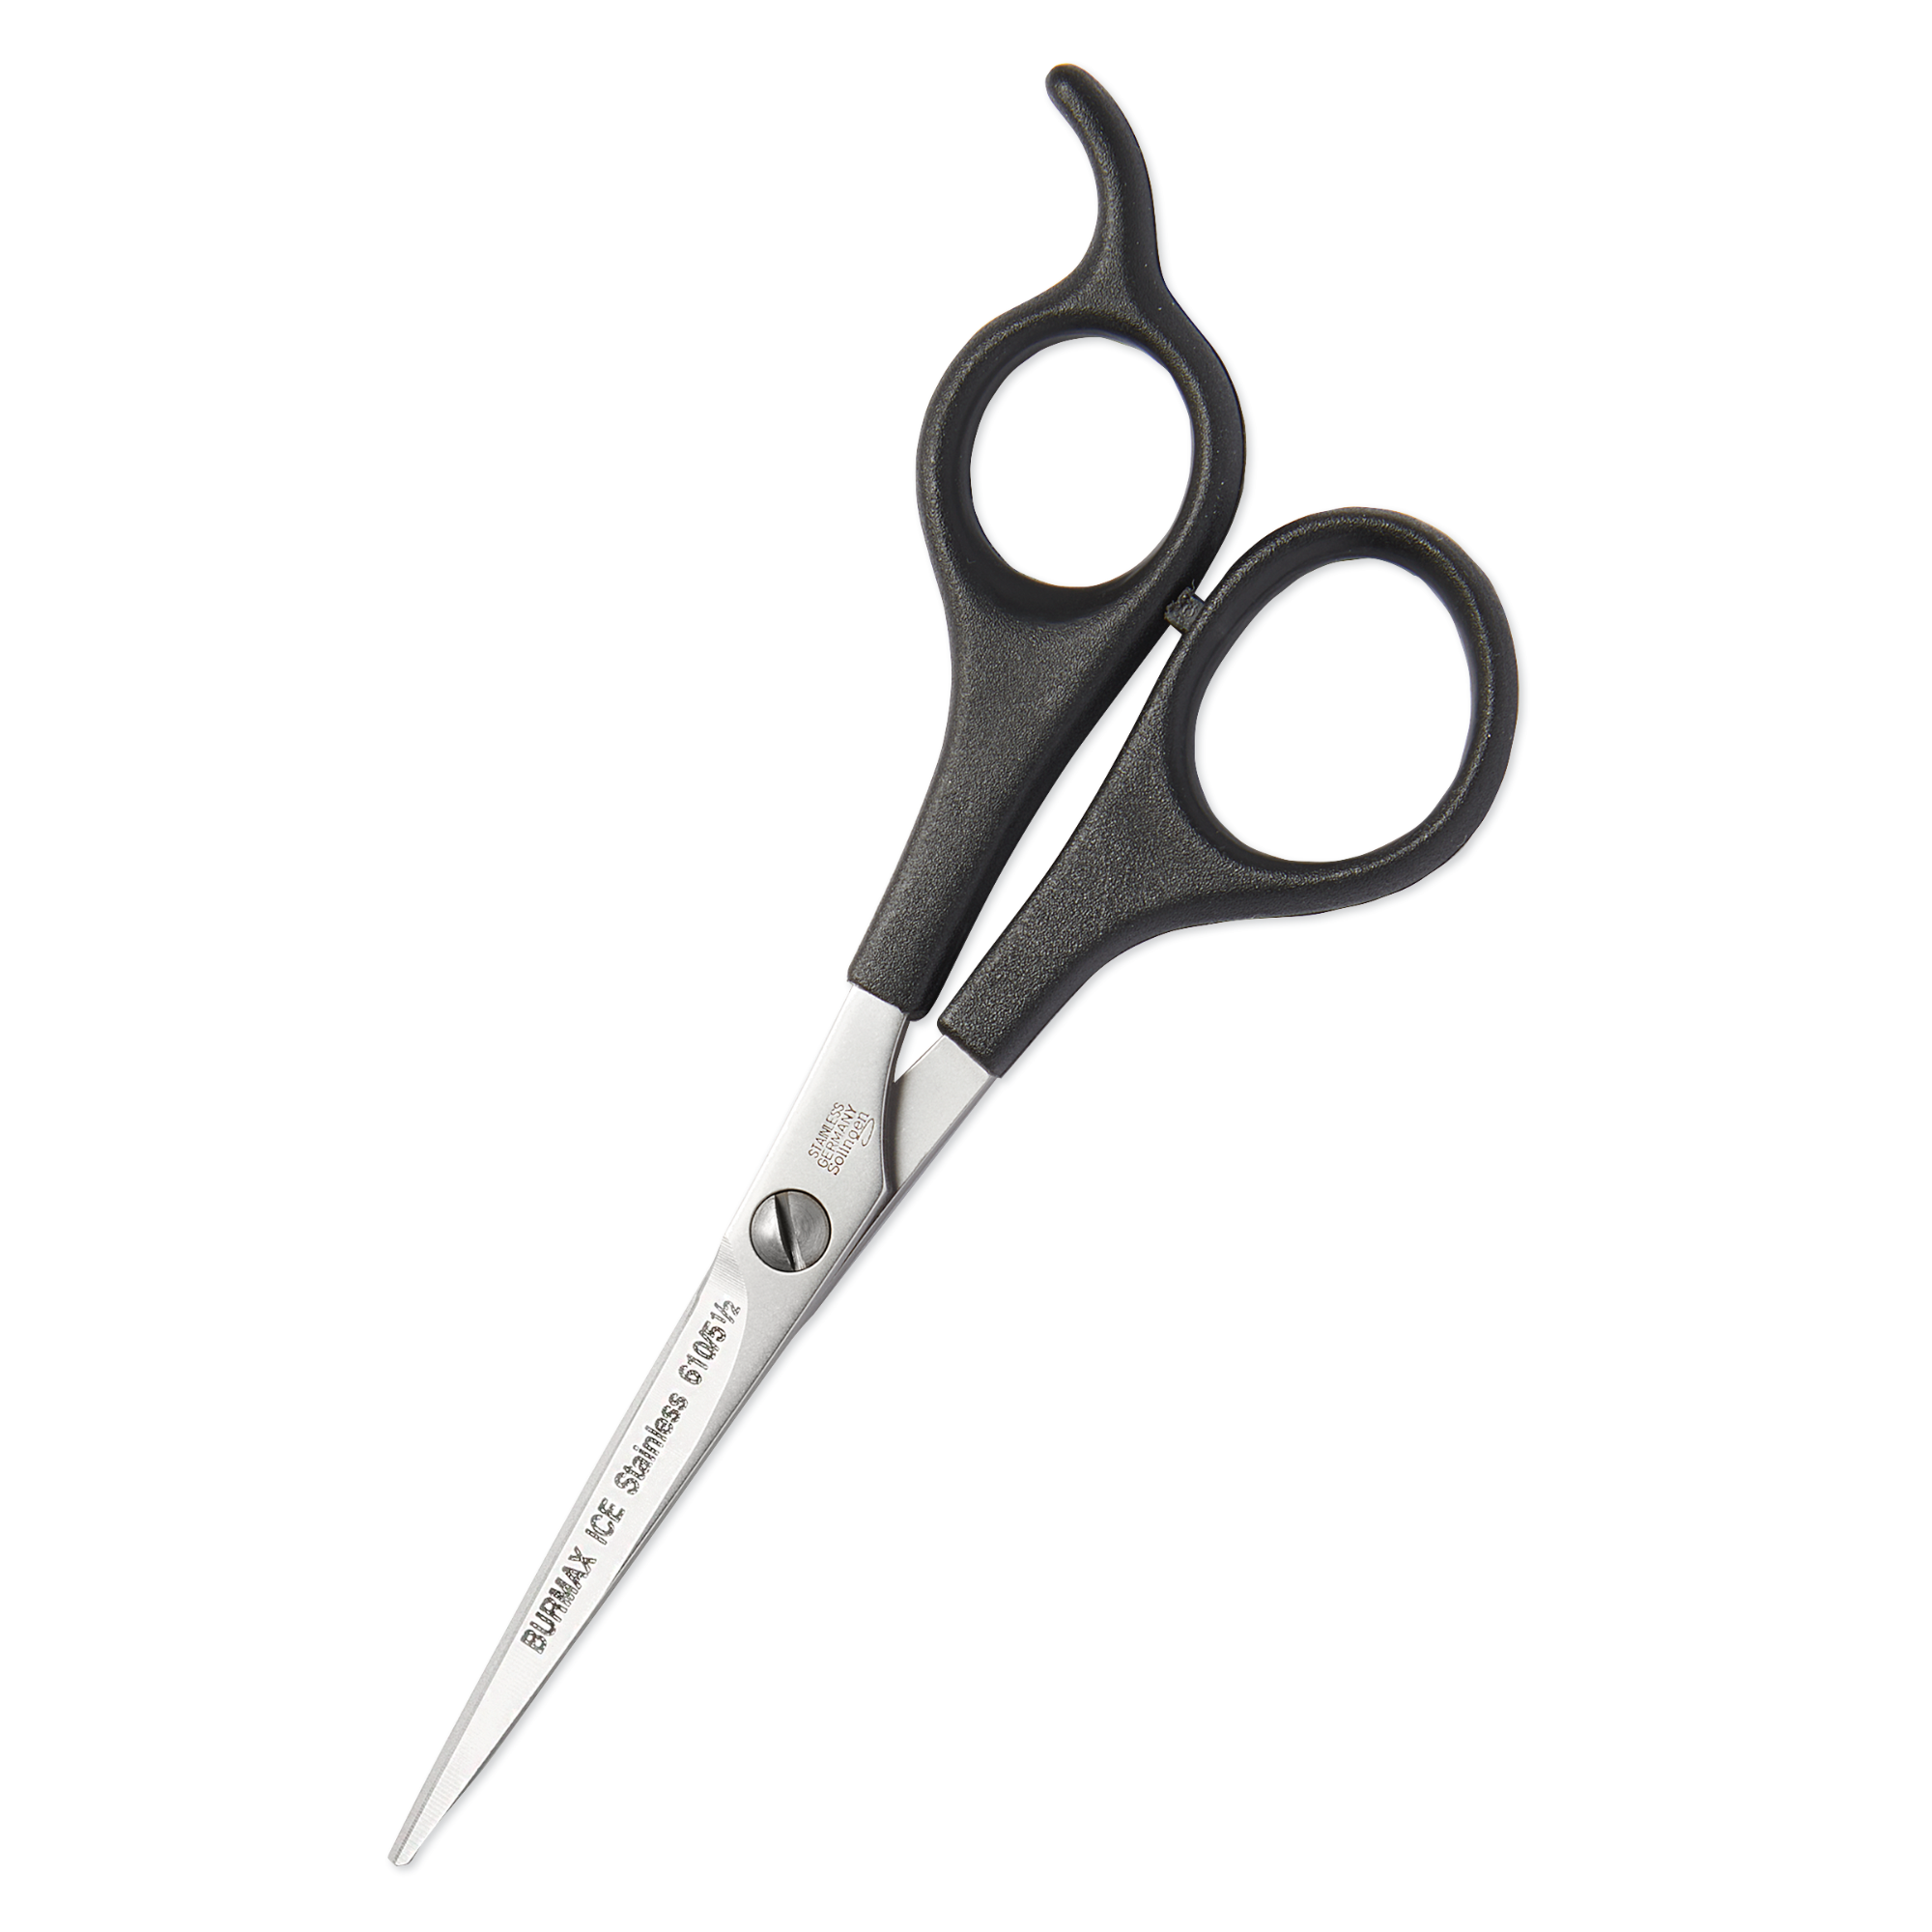 5-1/2" Stainless Steel Shear, German Made